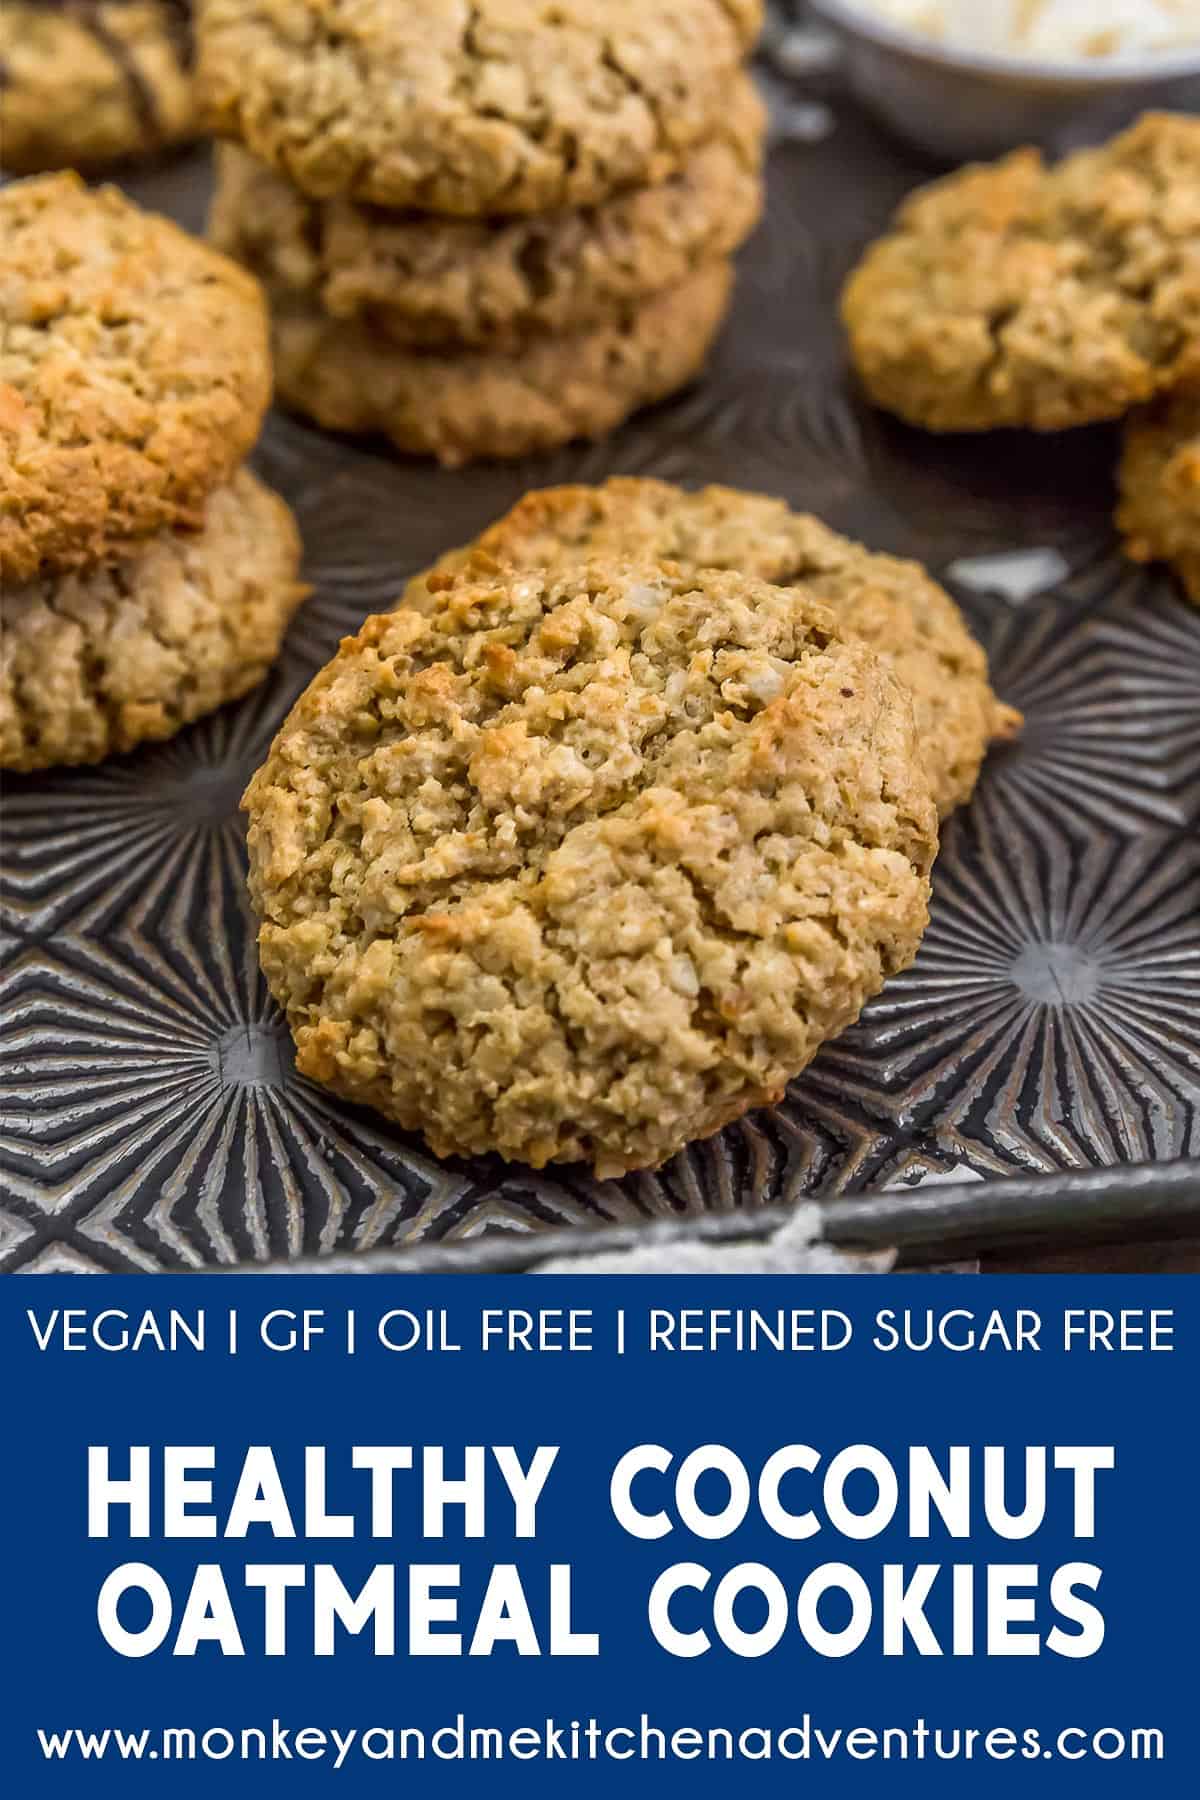 Healthy Coconut Oatmeal Cookies with text description